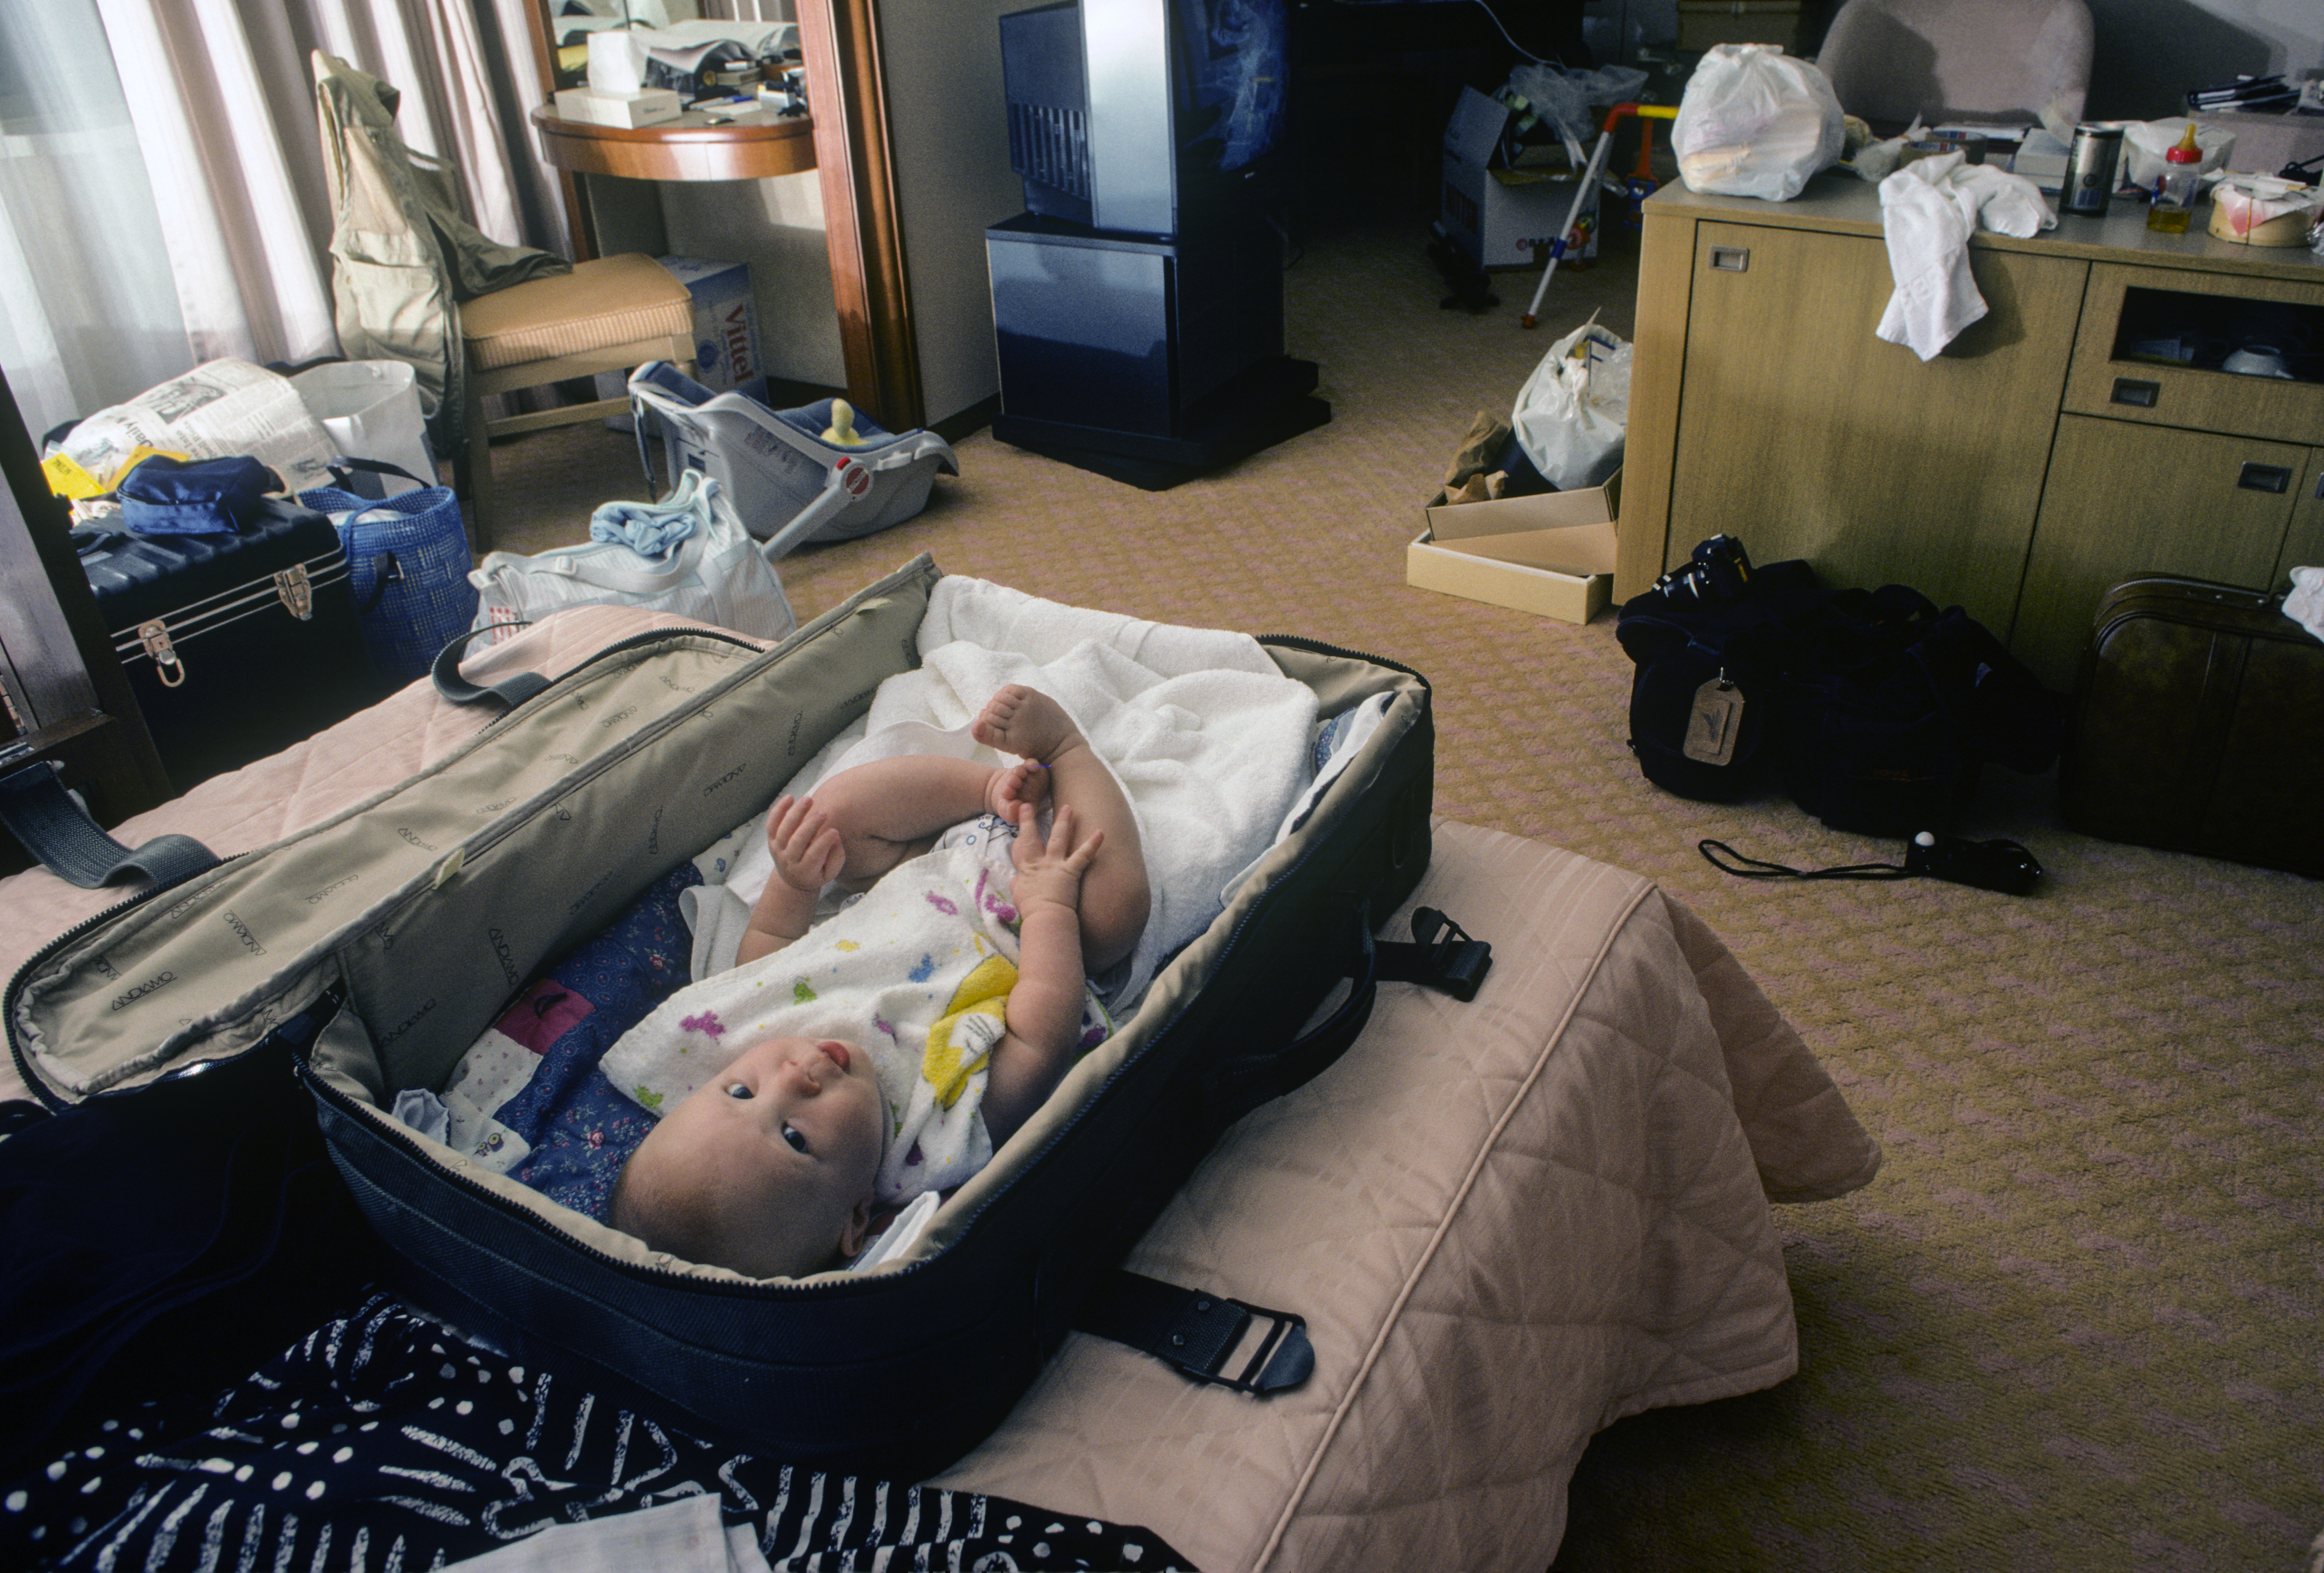 Baby lying in a suitcase | Source: Getty Images